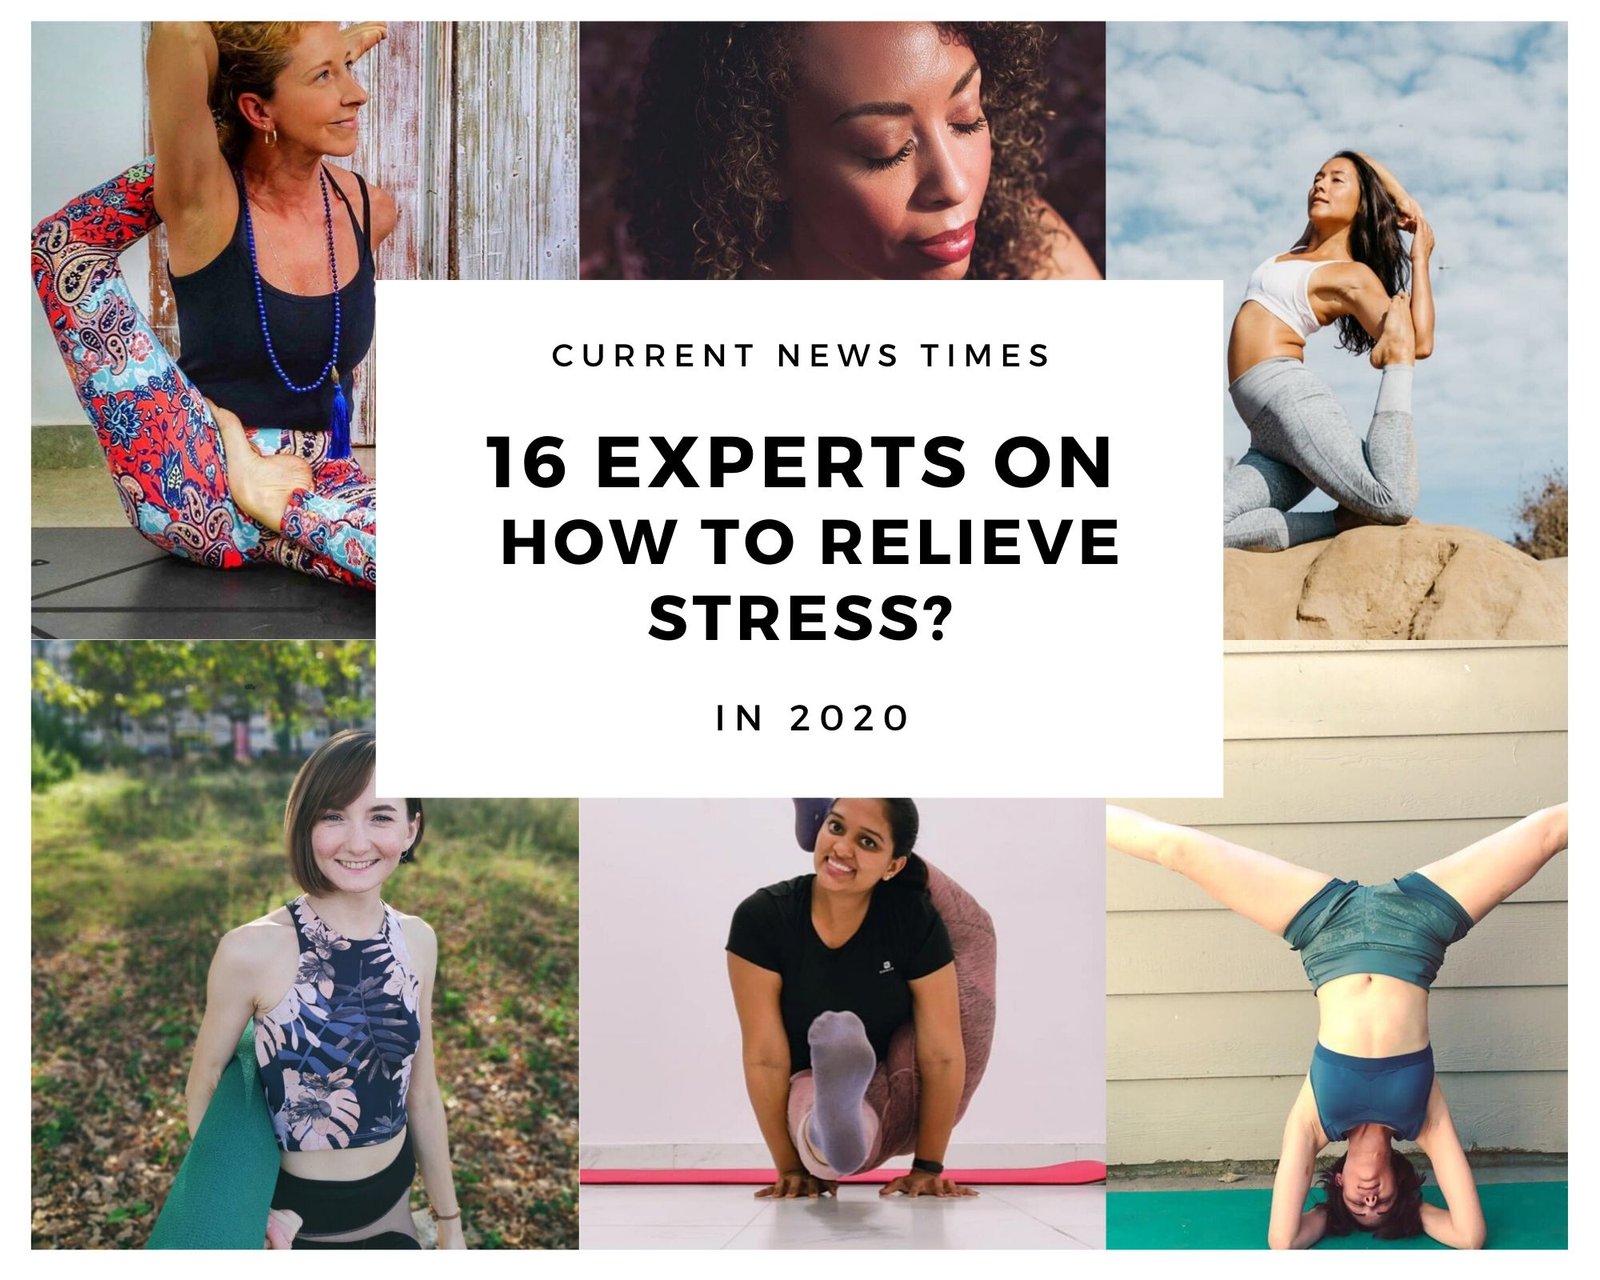 16-experts-on-how-to-relieve stress-in-2020